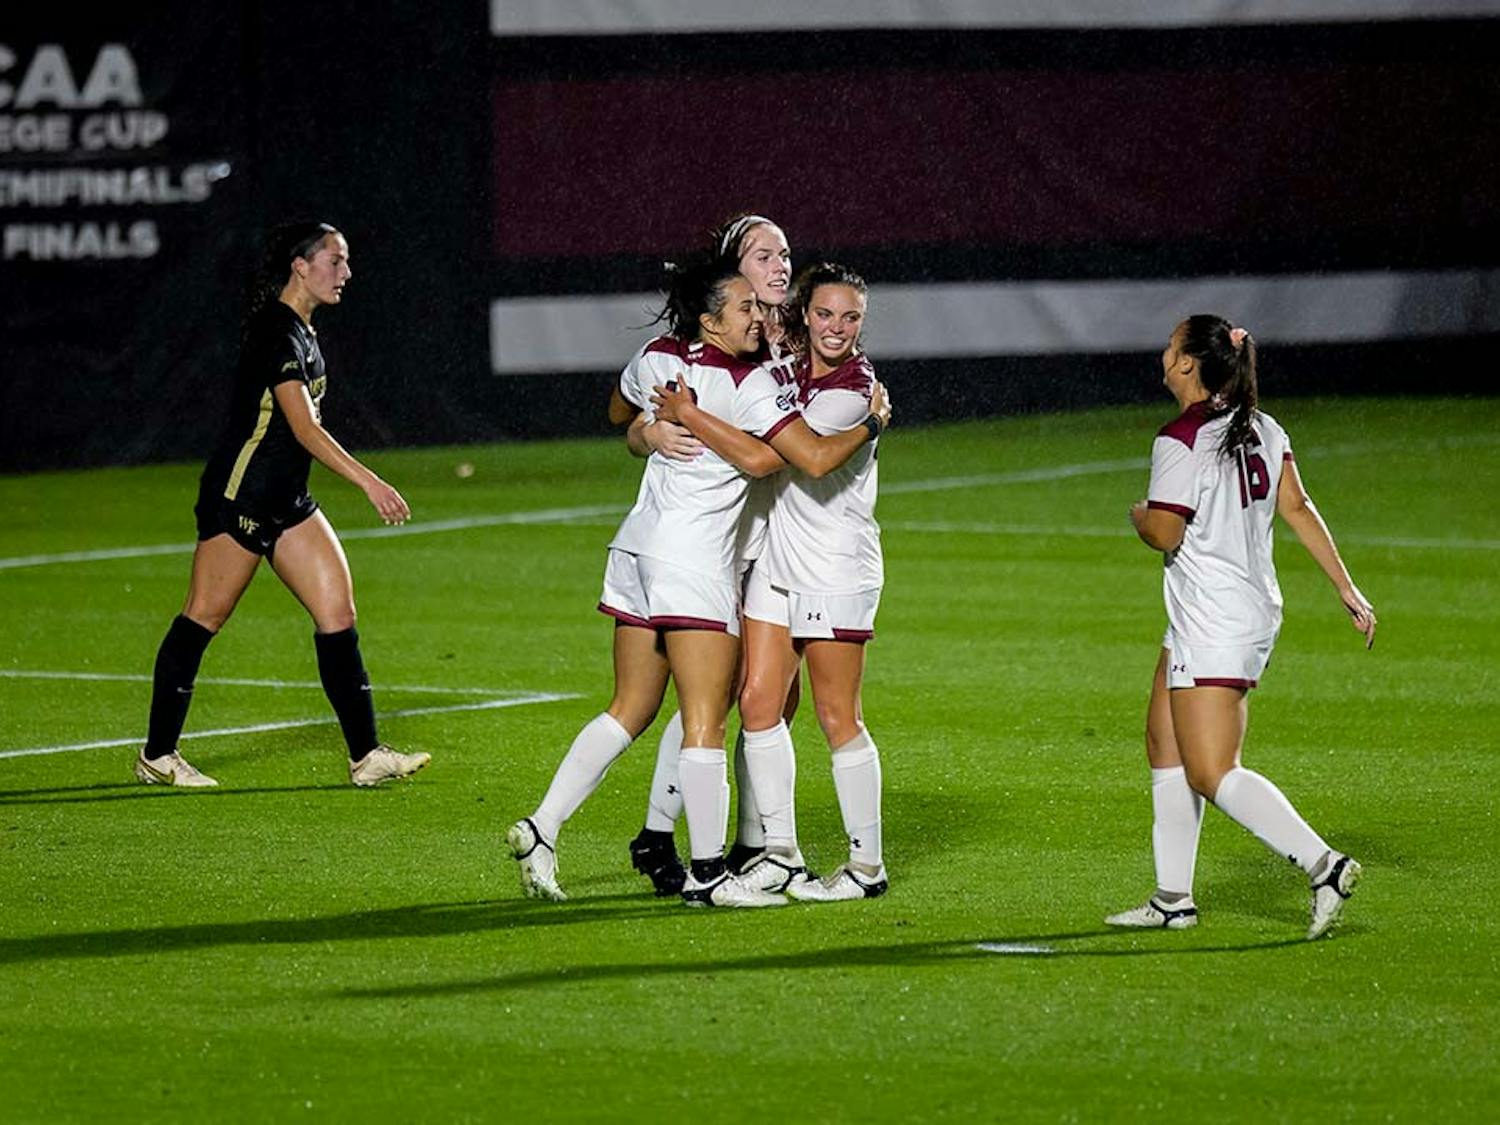 Junior forward Catherine Barry celebrates with her teammates after scoring a goal. Barry's goal was the second of the game and cemented the lead the Gamecocks had over Wake Forest at Stone Stadium on Nov. 12, 2022.